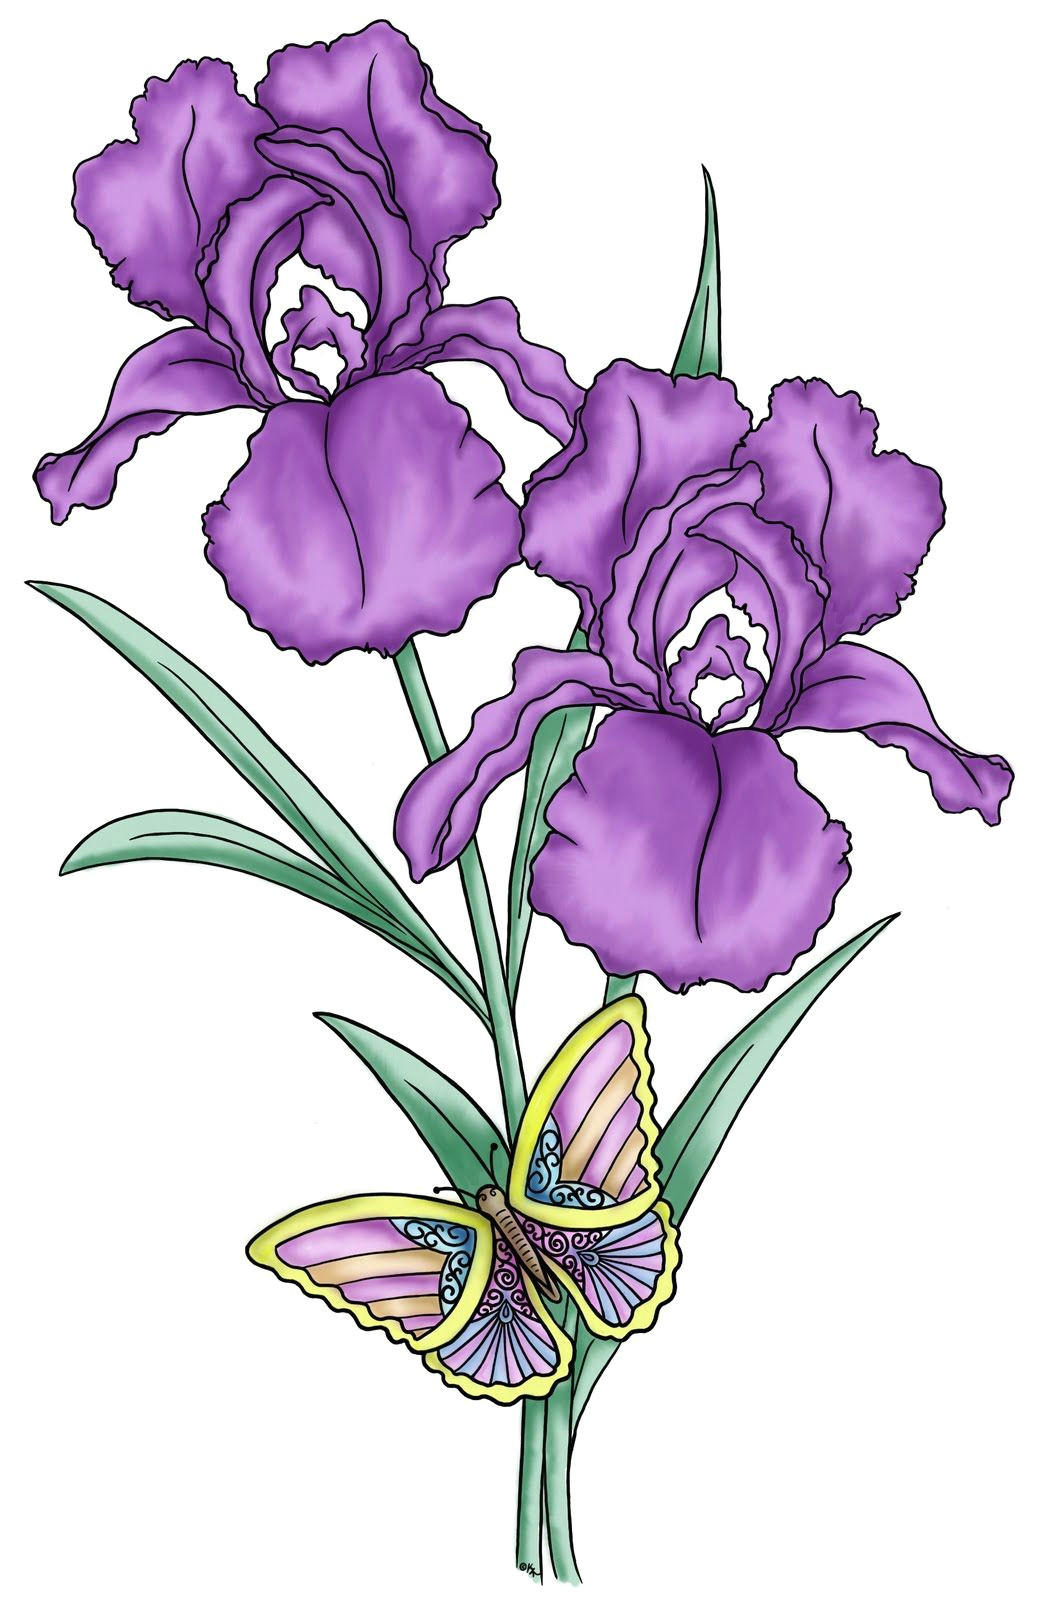 Drawings Of Purple Flower the Iris Flower is Of Interest as An Example Of the Relation Between